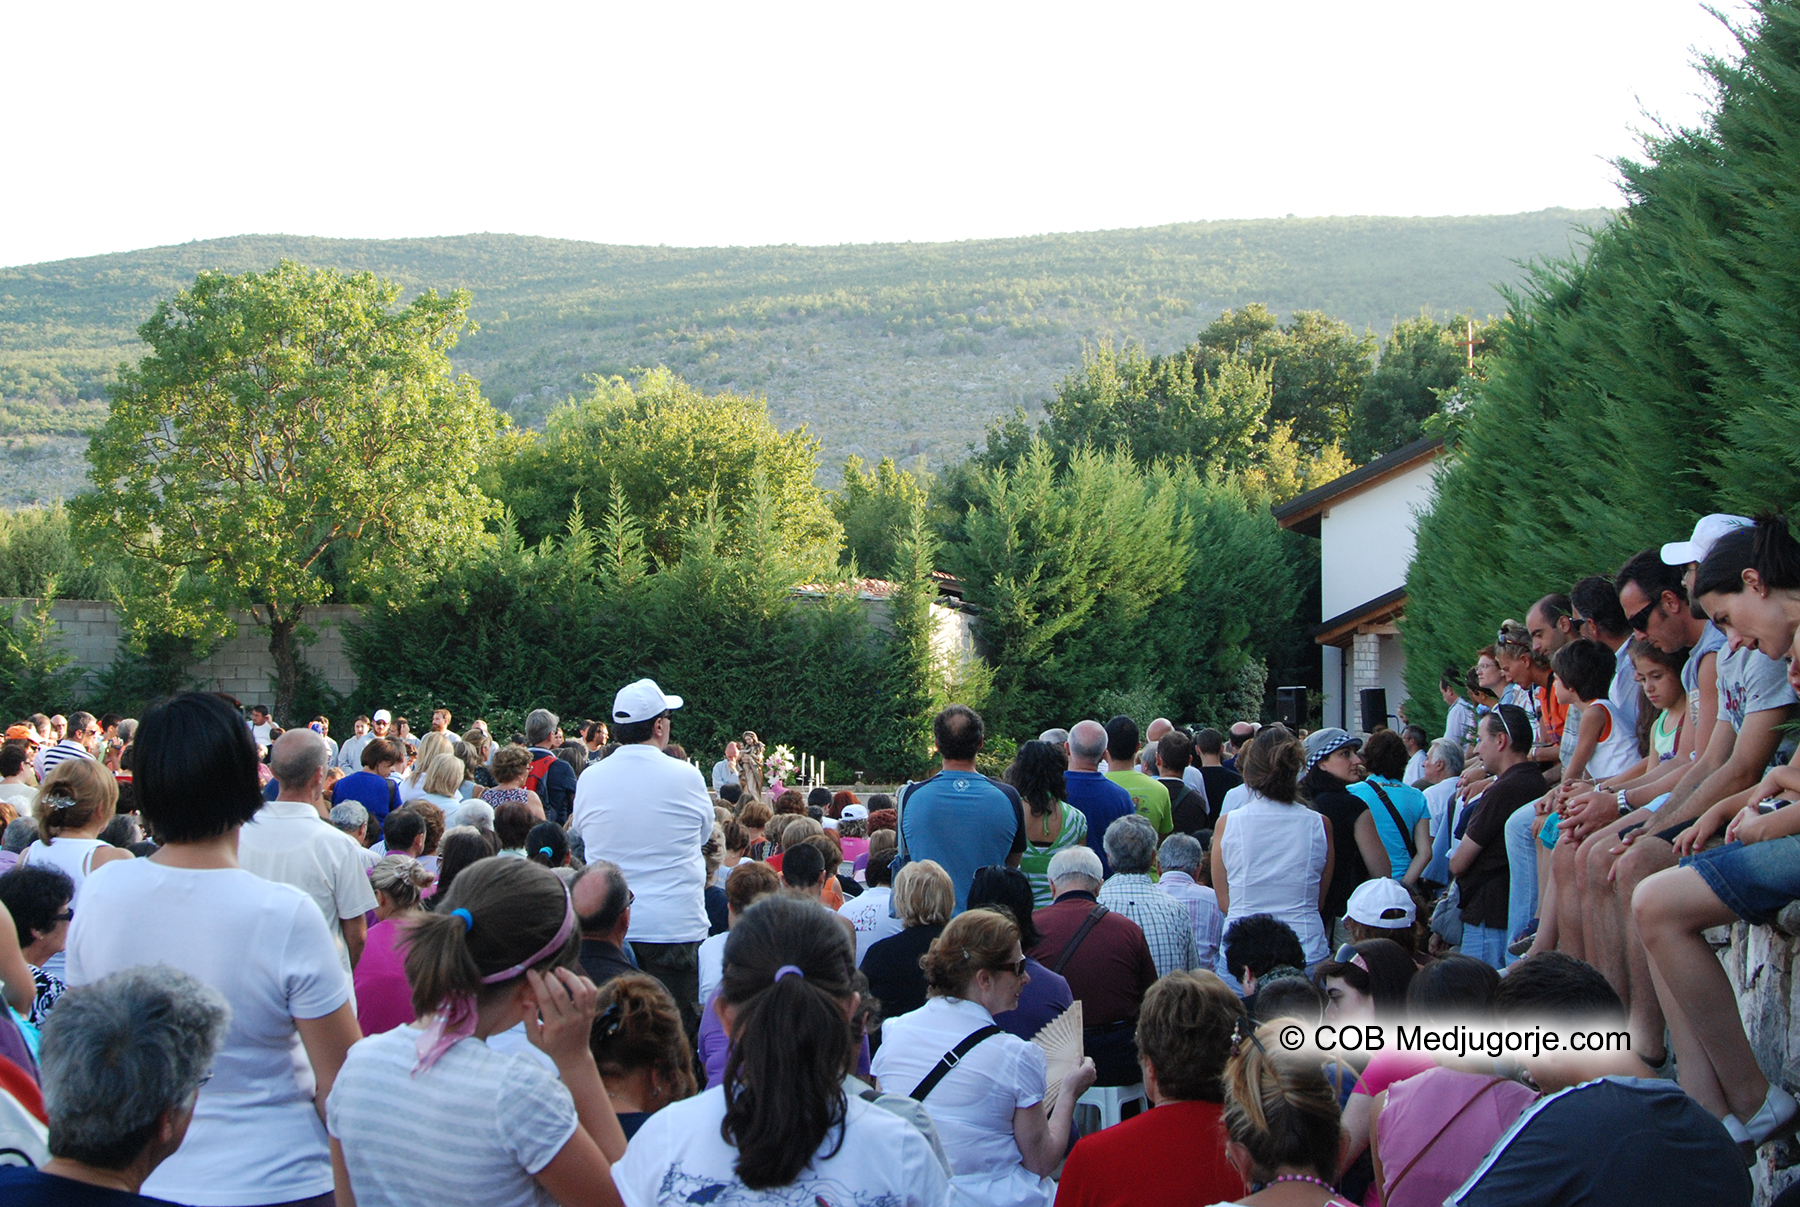 Crowd gathered for Marija's Apparition August 24, 2009